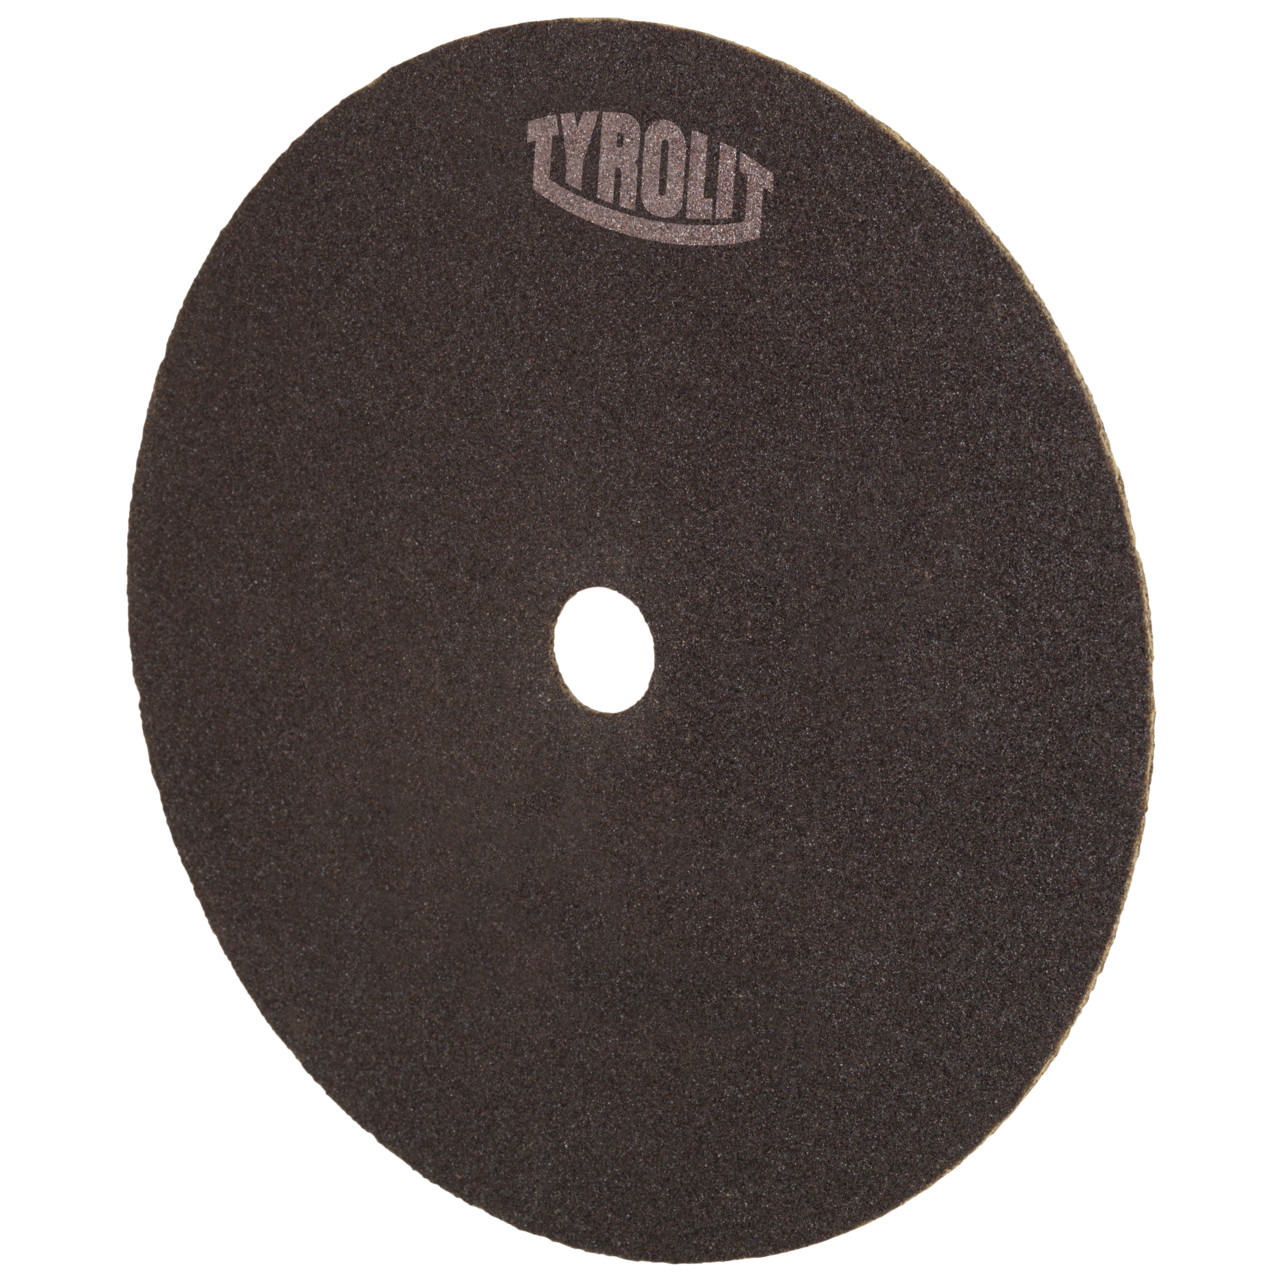 Tyrolit Cutting disc for cutting and saw sharpening DxDxH 200x1.6x32 For steel and HSS, shape: 41N - straight version (non-woven cutting disc), Art. 230691